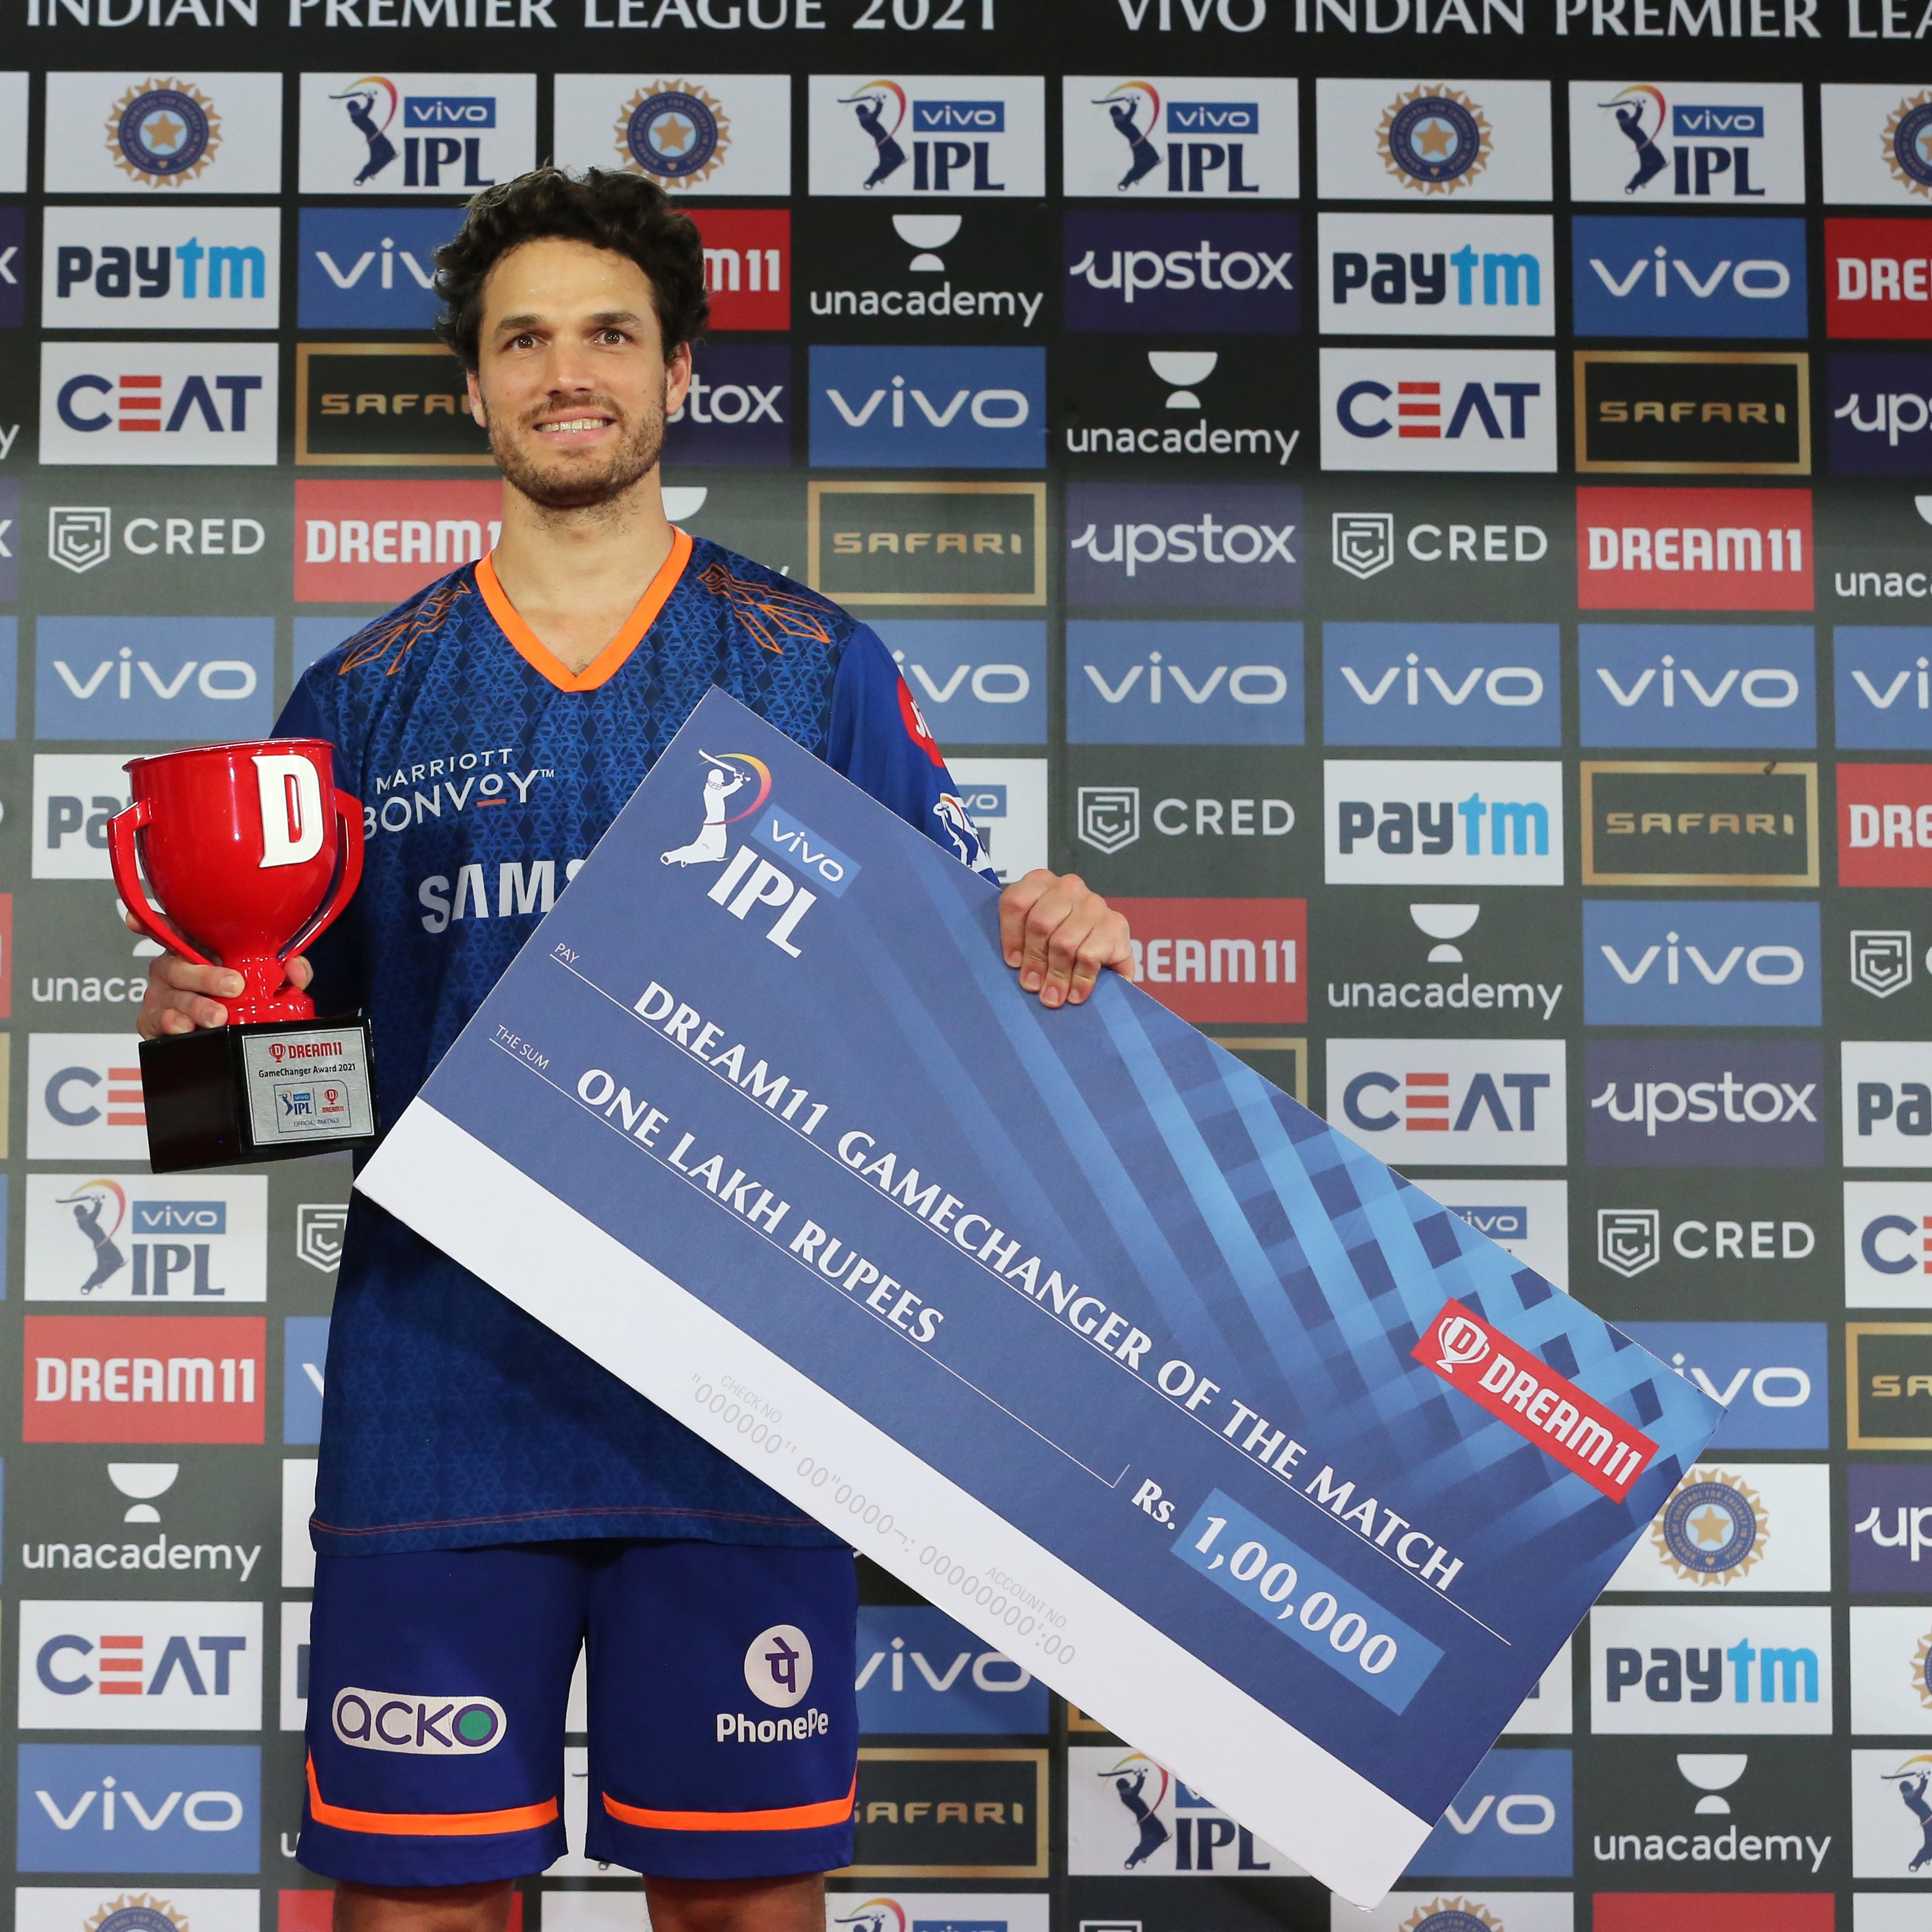 Nathan Coulter-Nile was adjudged Player of the Match | BCCI/IPL 